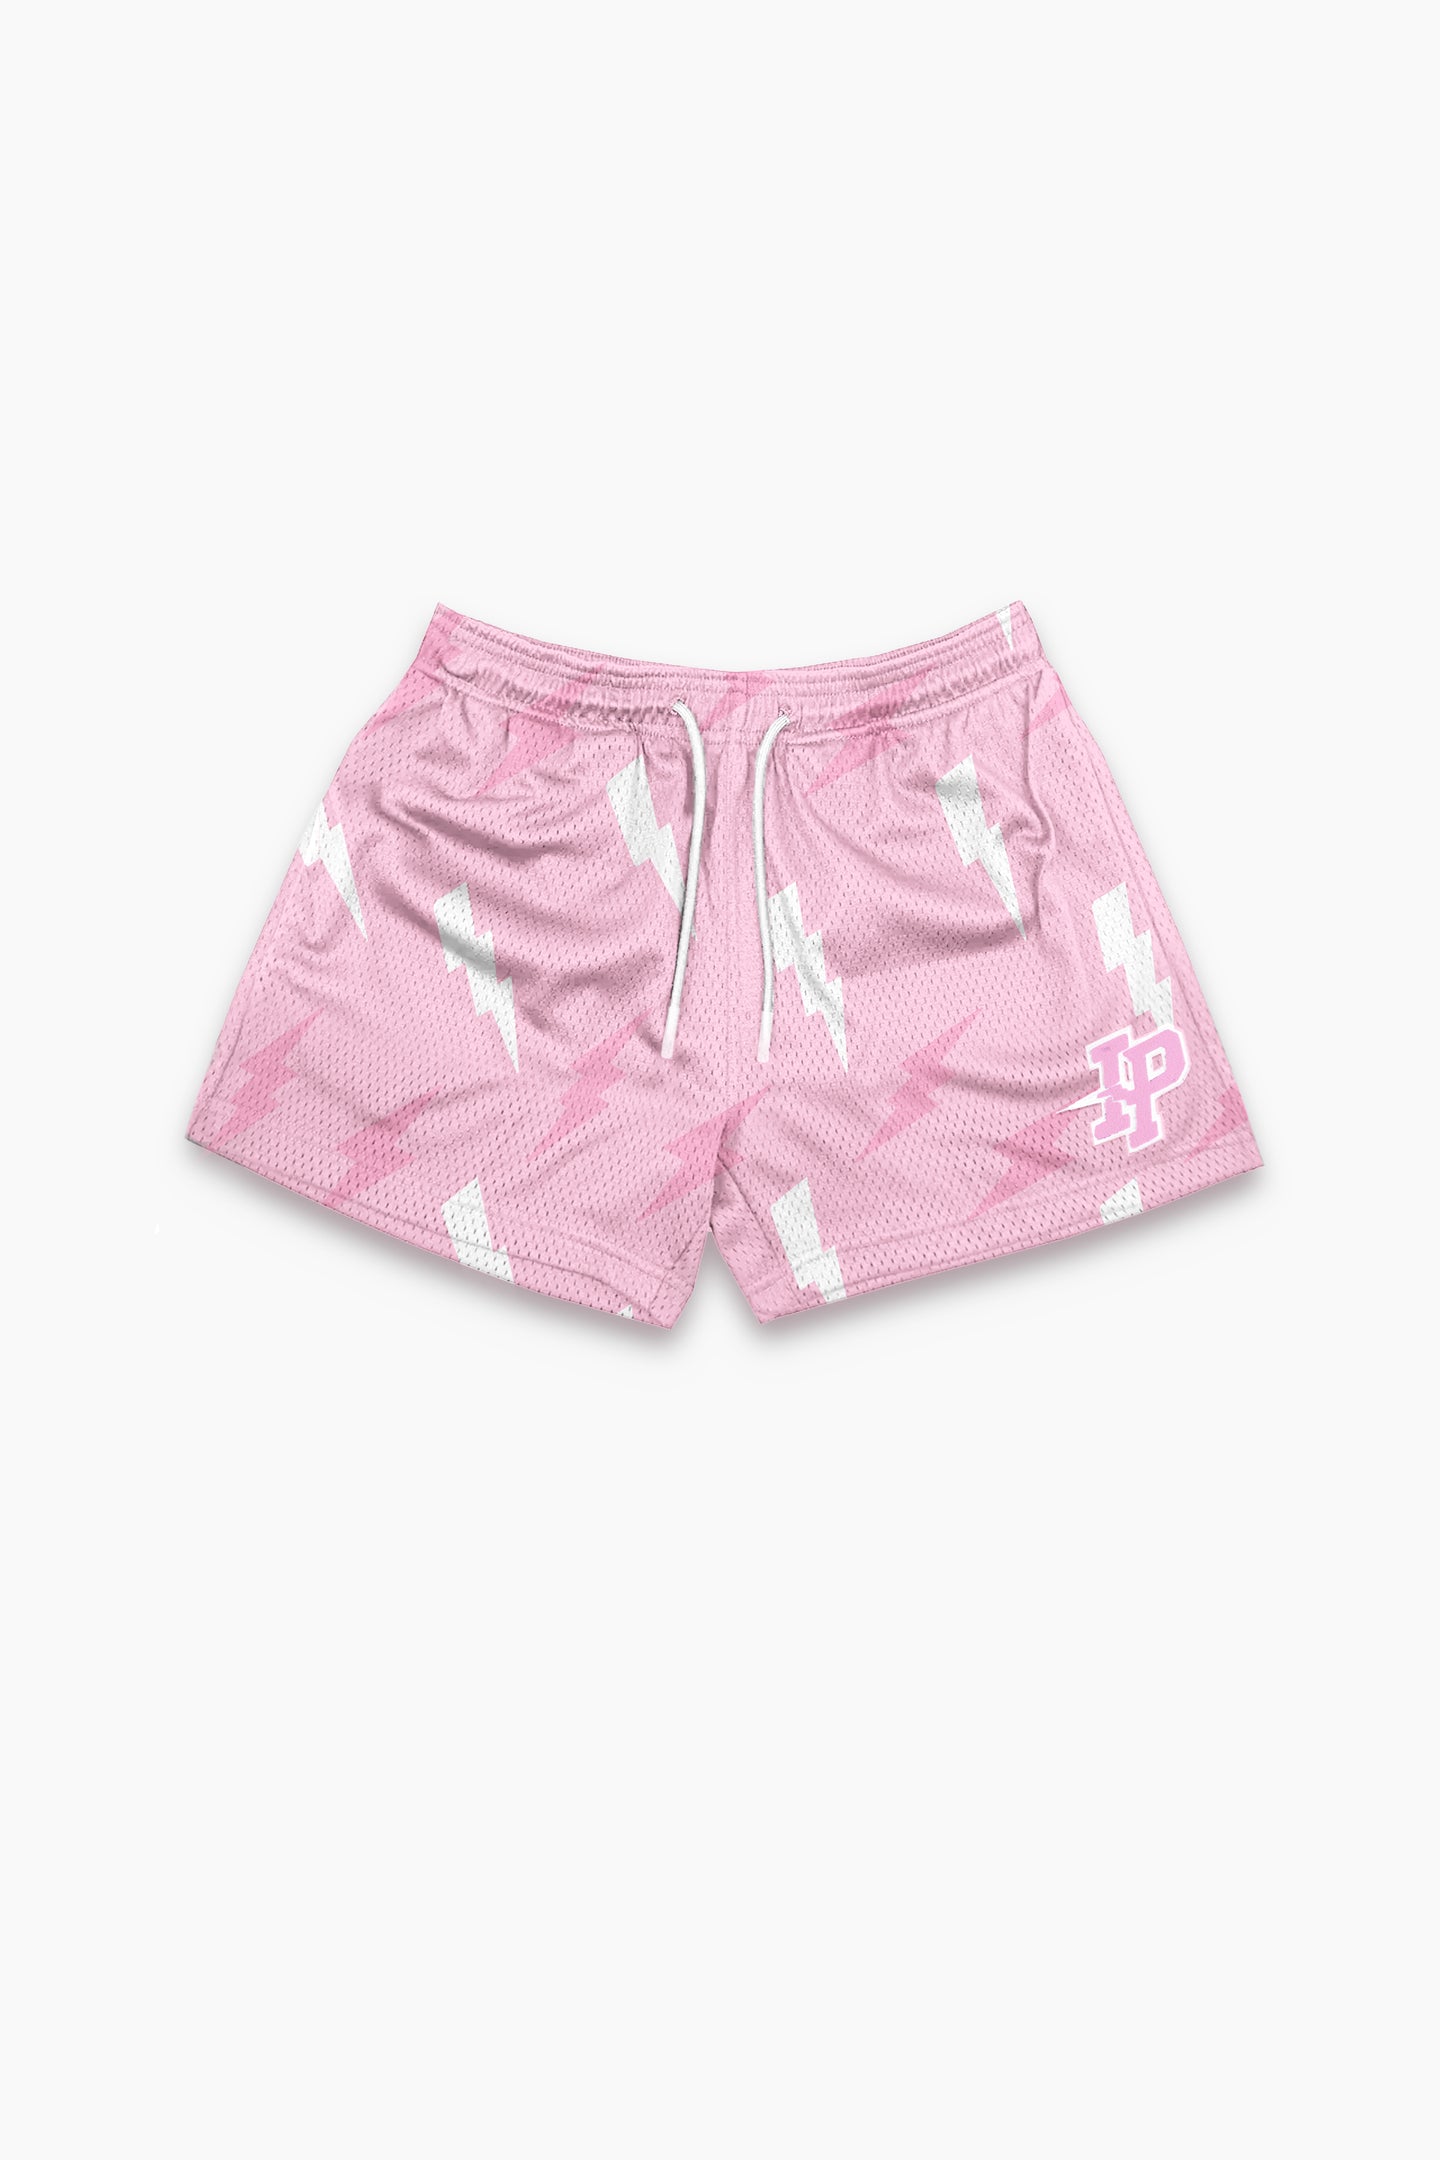 WOMEN’S GRAPHIC MESH SHORTS - SCATTER BOLT PINK